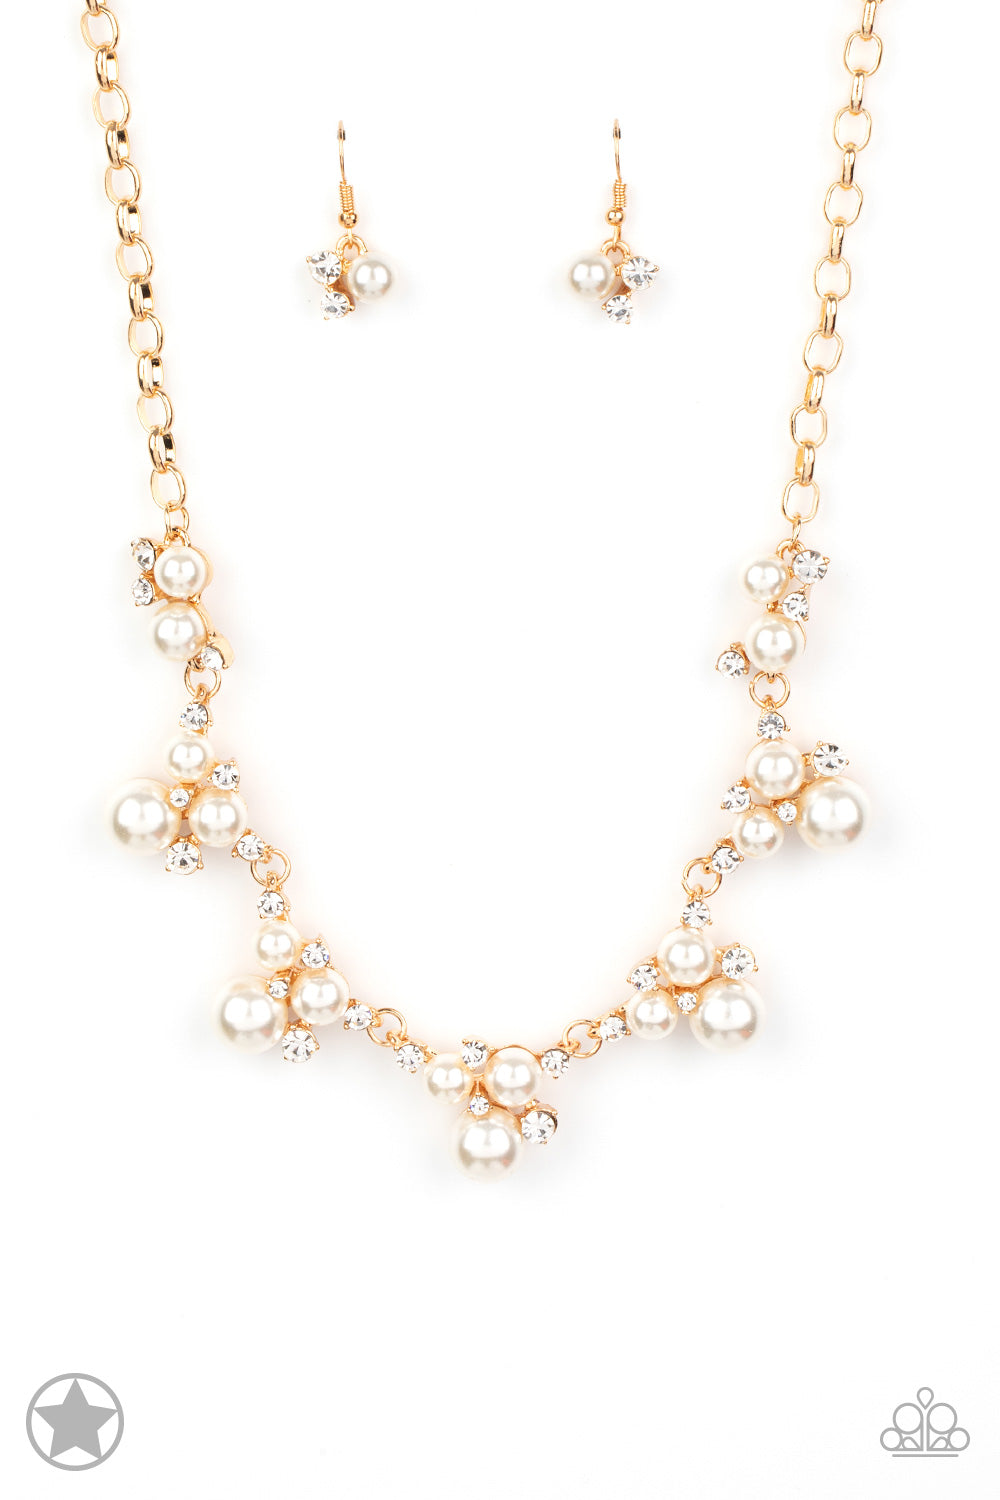 Toast To Perfection Gold
Necklace Paparazzi